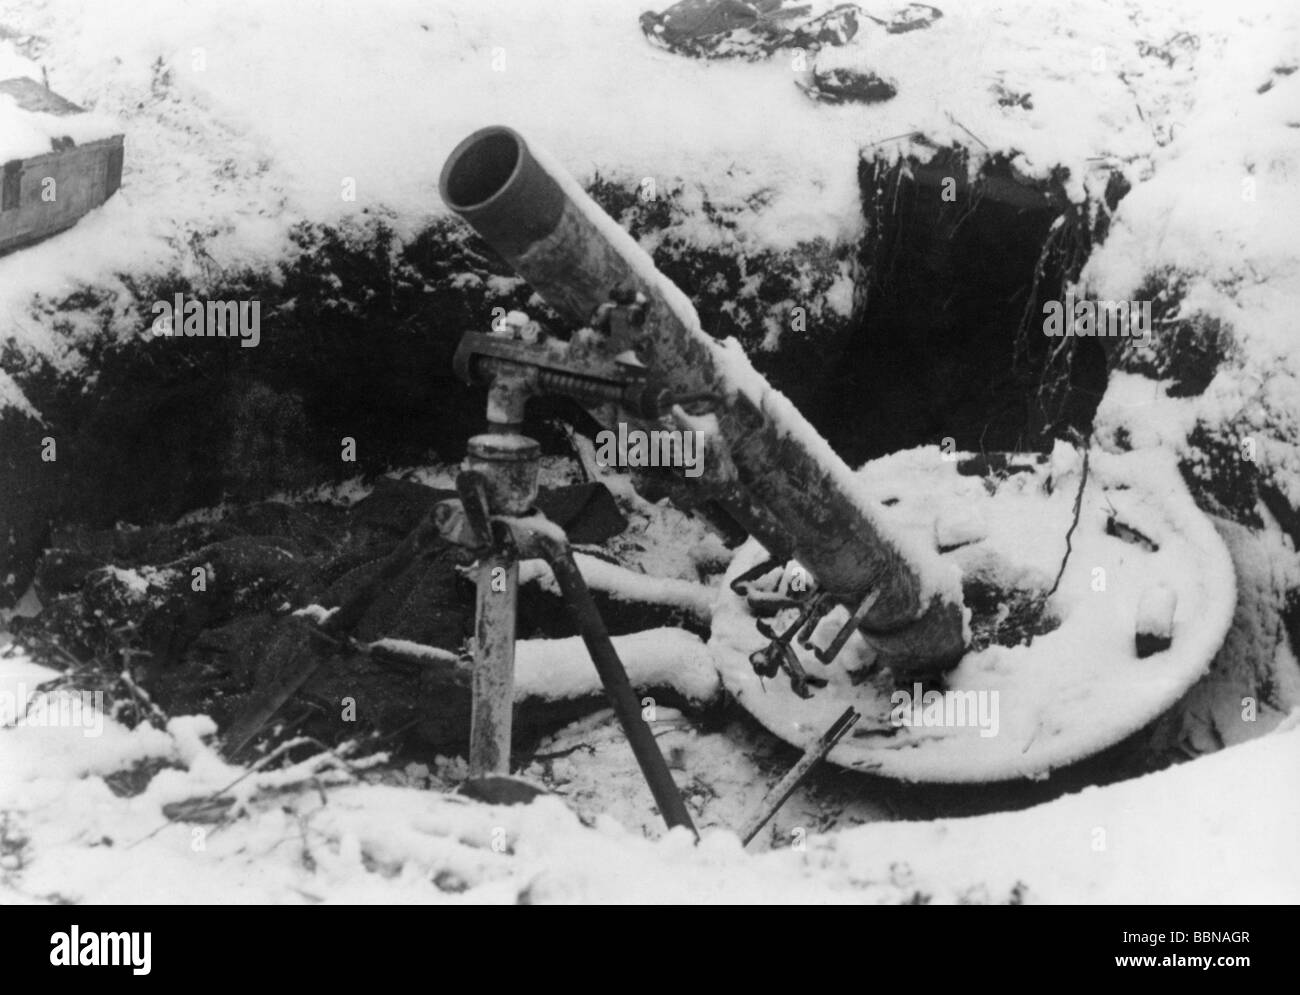 events, Second World War / WWII, Russia 1944 / 1945, Soviet mortar, captured by the Germans during a counterattack near Britskoye, 27.1.1944, Eastern Front, USSR, spoils, winter snow, 20th century, historic, historical, Army Group South, Soviet Union, losses, Red Army, mortars, weapons, arms, 1940s, Stock Photo